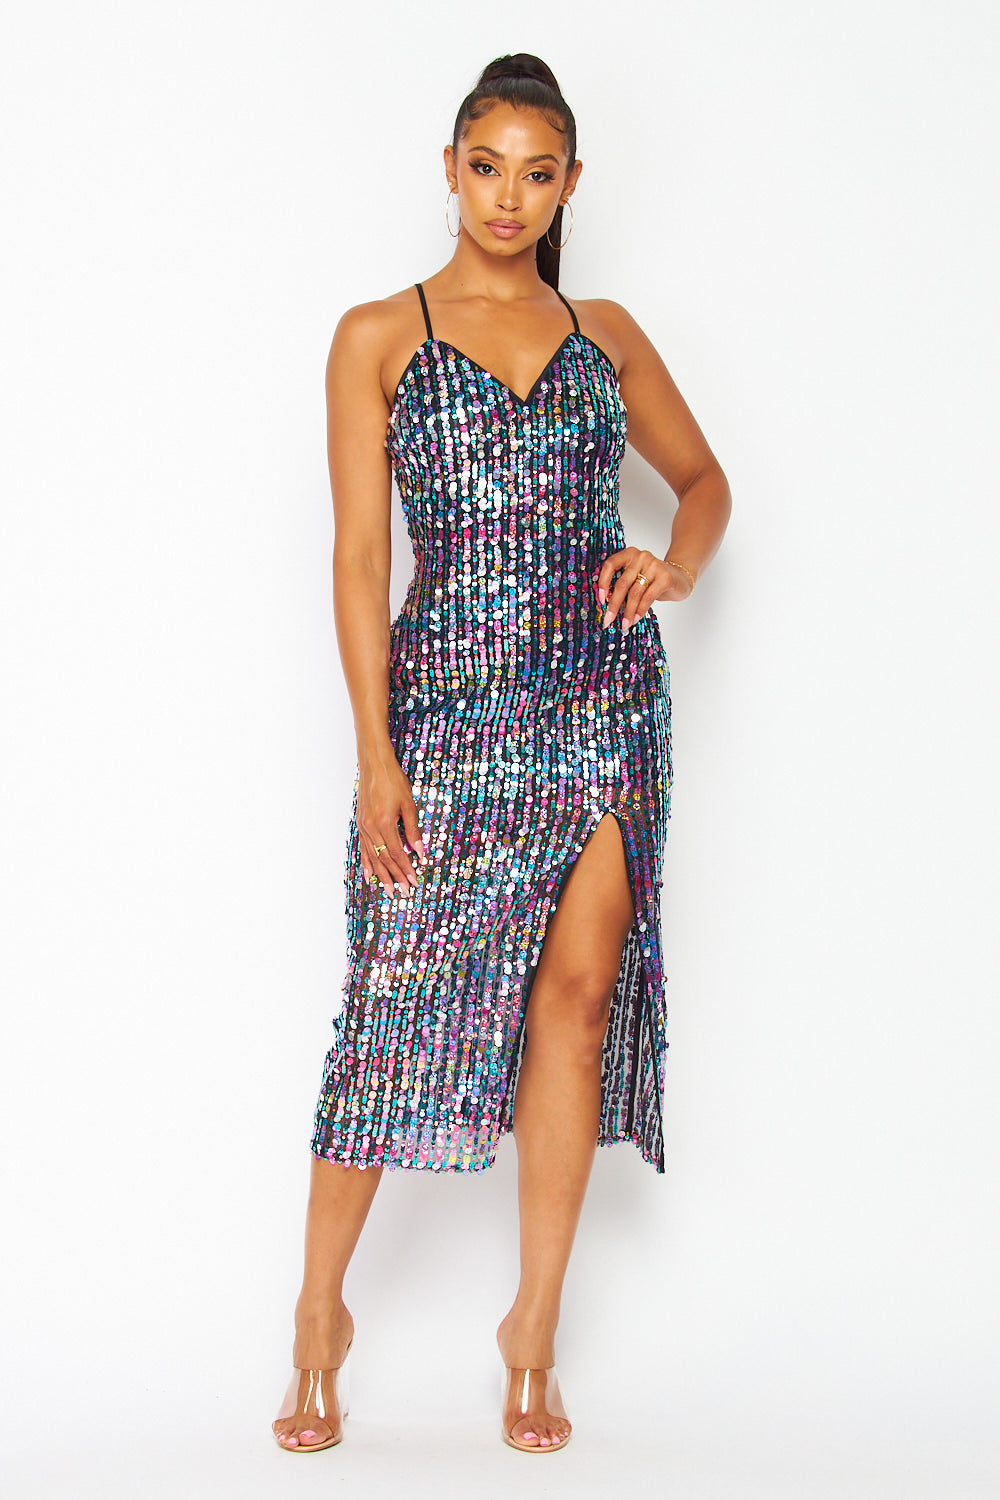 Time is Gold Sparkly Multi Color Sequin Midi Dress